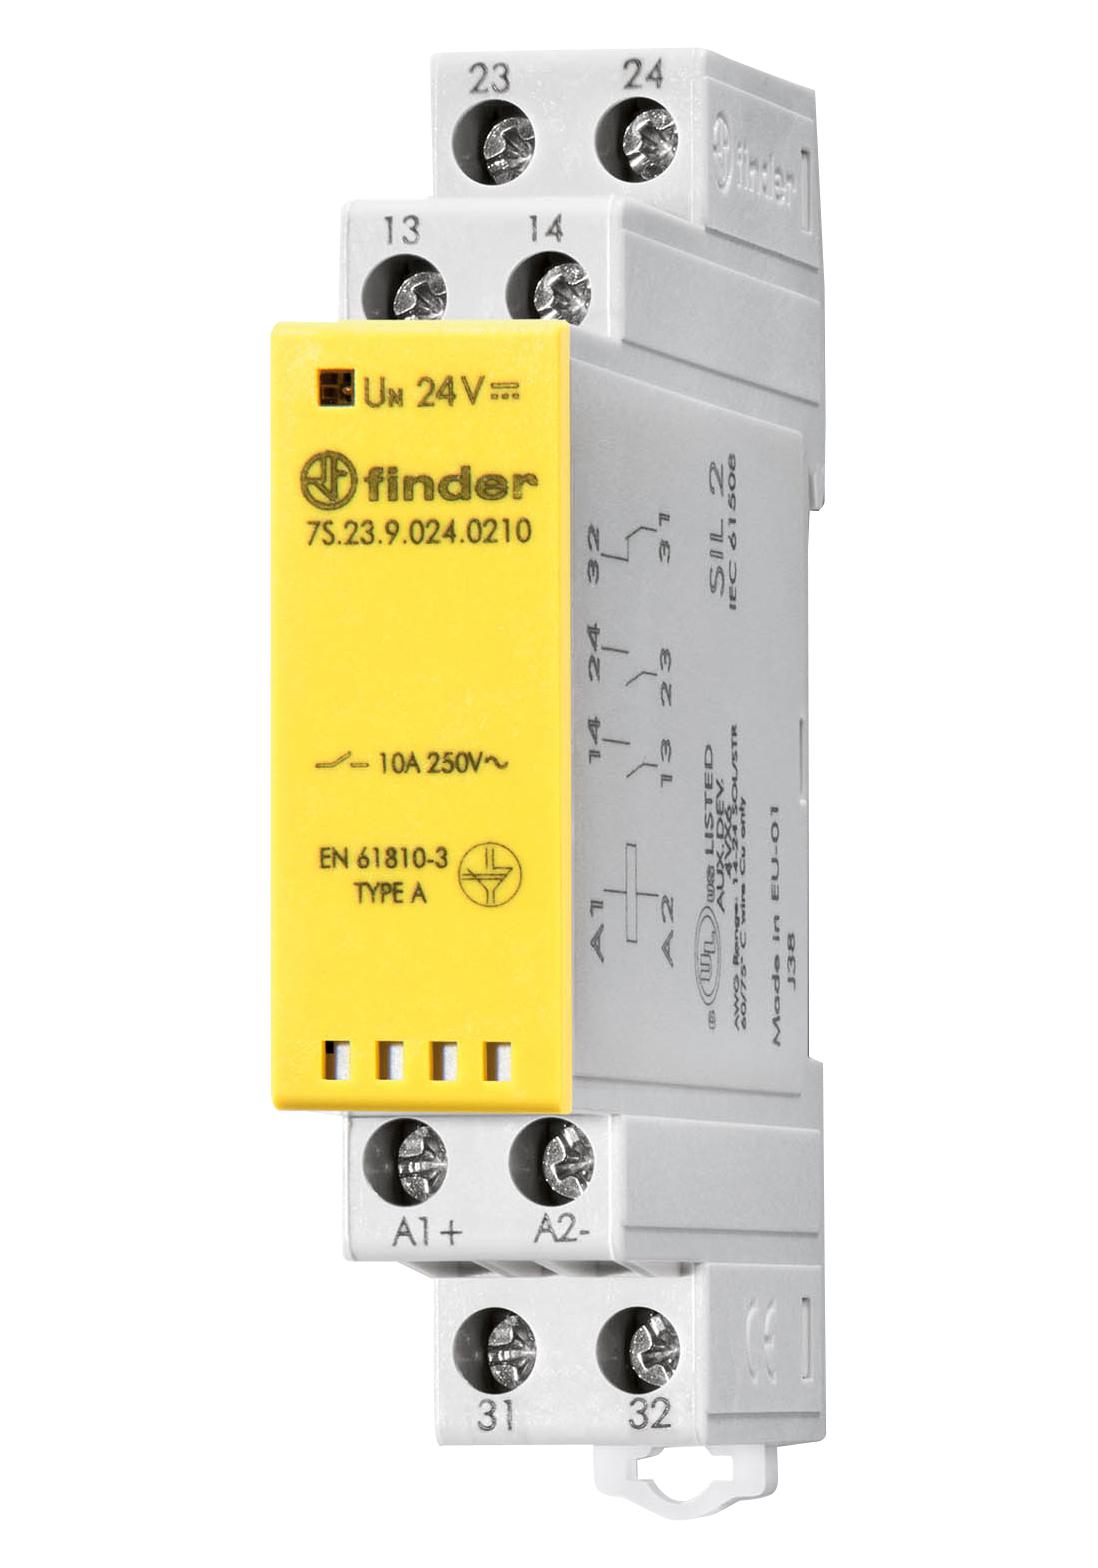 FINDER Power - General Purpose 7S.23.9.024.0210 POWER RELAY, DPST-NO/SPST-NC, 10A, 250V FINDER 2930801 7S.23.9.024.0210